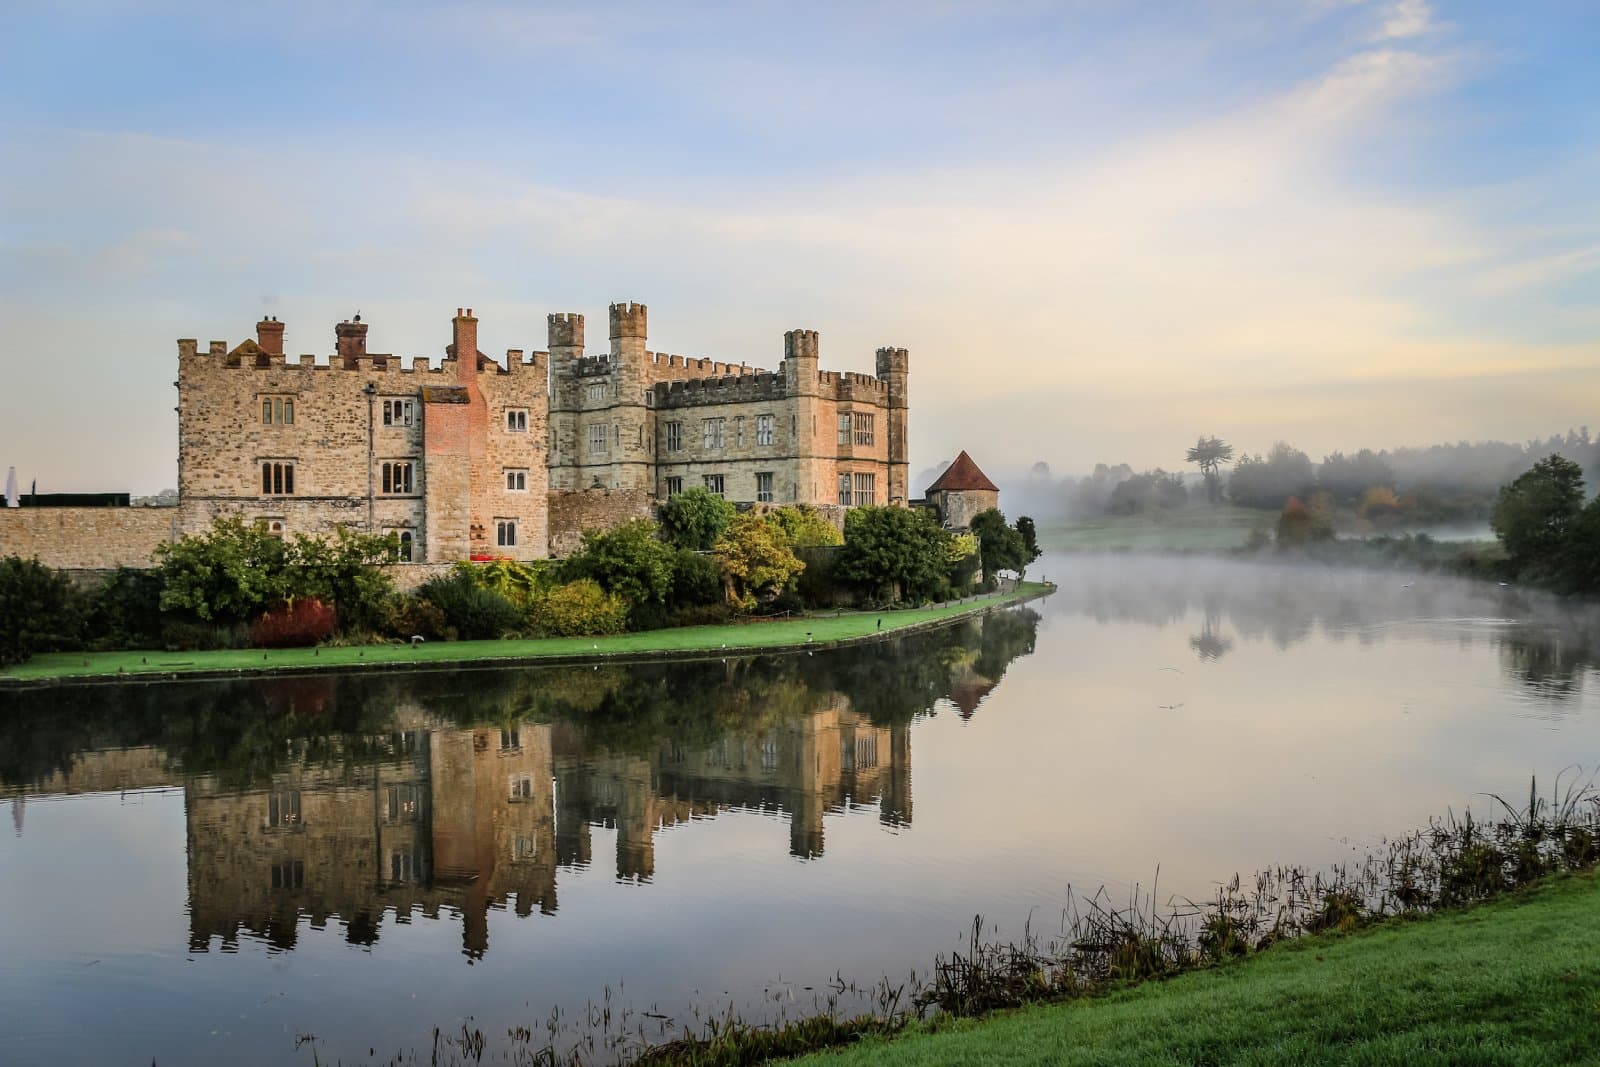 Image Credit: Shutterstock / JuliaST <p>Despite being known as the Garden of England, Kent has seen a dip in tourism, perhaps impacted by the shift in visitor preferences towards city breaks and international festivals.</p>